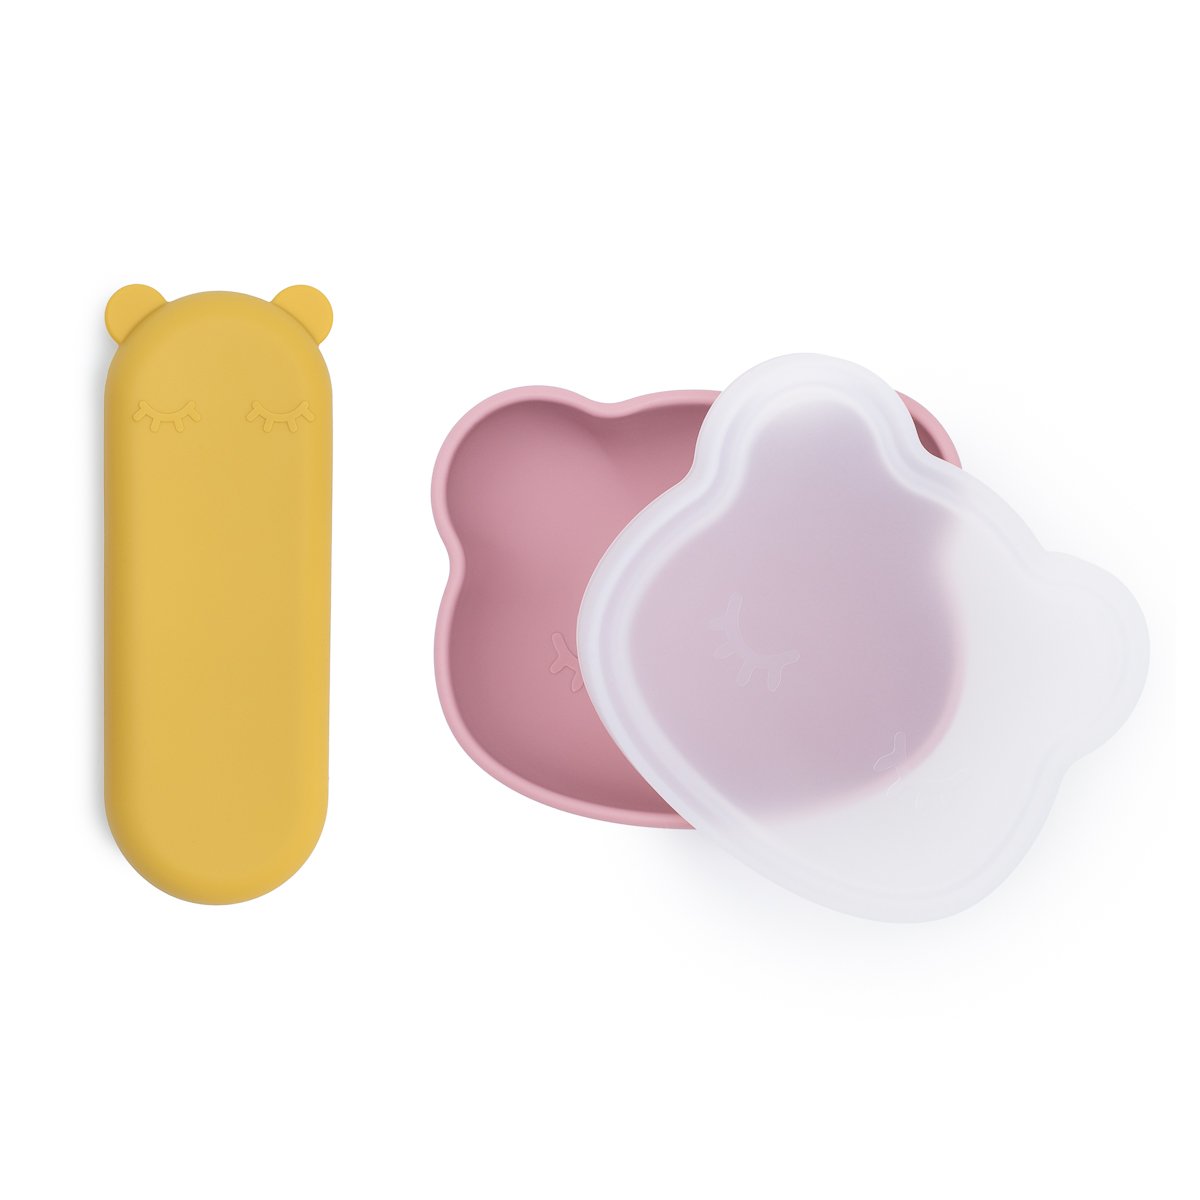 Feedie Fork & Spoon Set with Case - Yellow - Little Reef and Friends